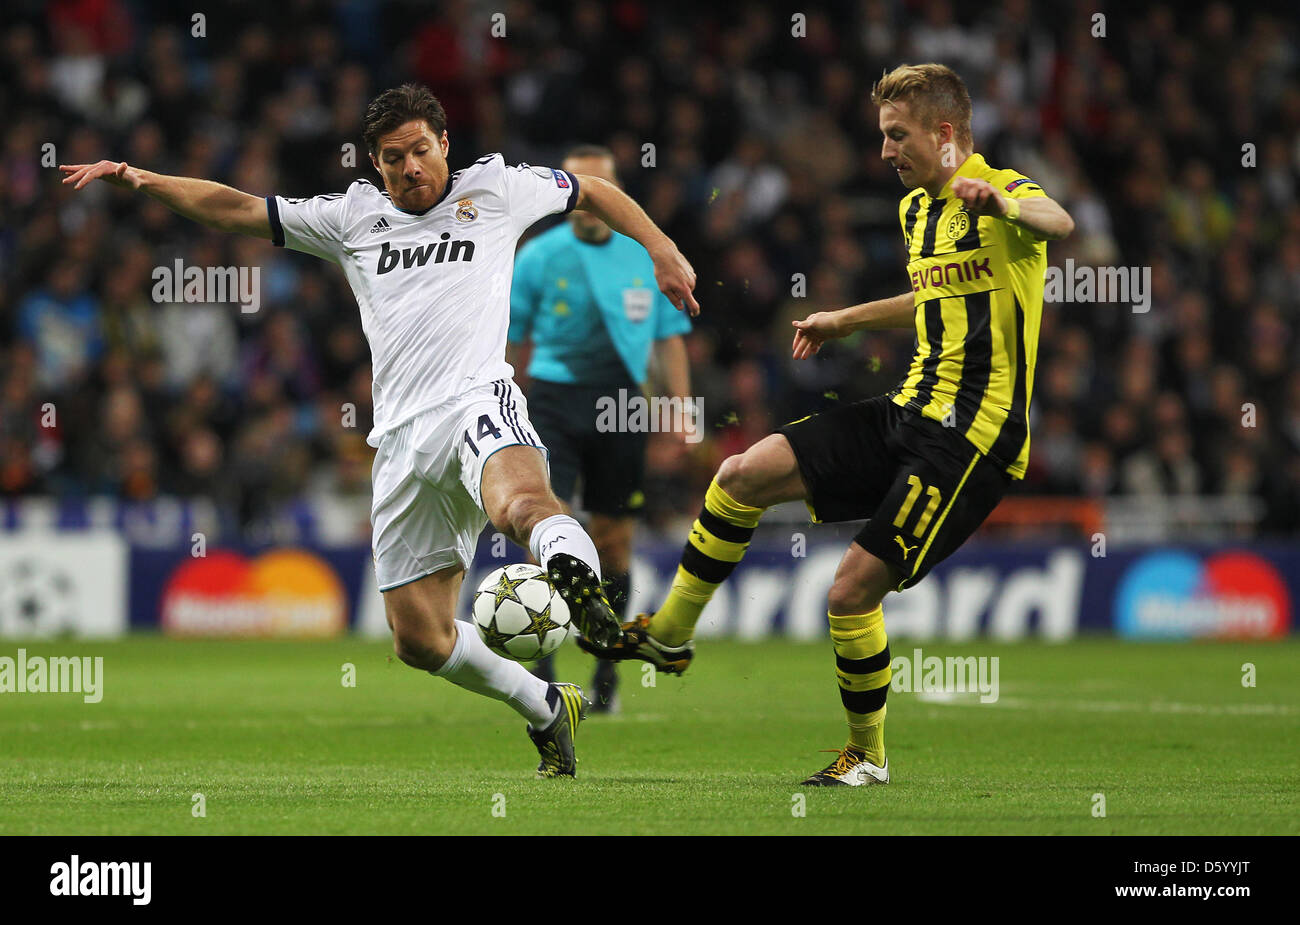 Real Madrid's Xabi Alonso (l) fights for the ball with Dortmund's Marco Reus during the Champions League Group D soccer match between Real Madrid and Borussia Dortmund at the Santiago Bernabeu Stadium in Madrid, Spain, 6 November 2012. Photo: Fabian Stratenschulte/dpa  +++(c) dpa - Bildfunk+++ Stock Photo